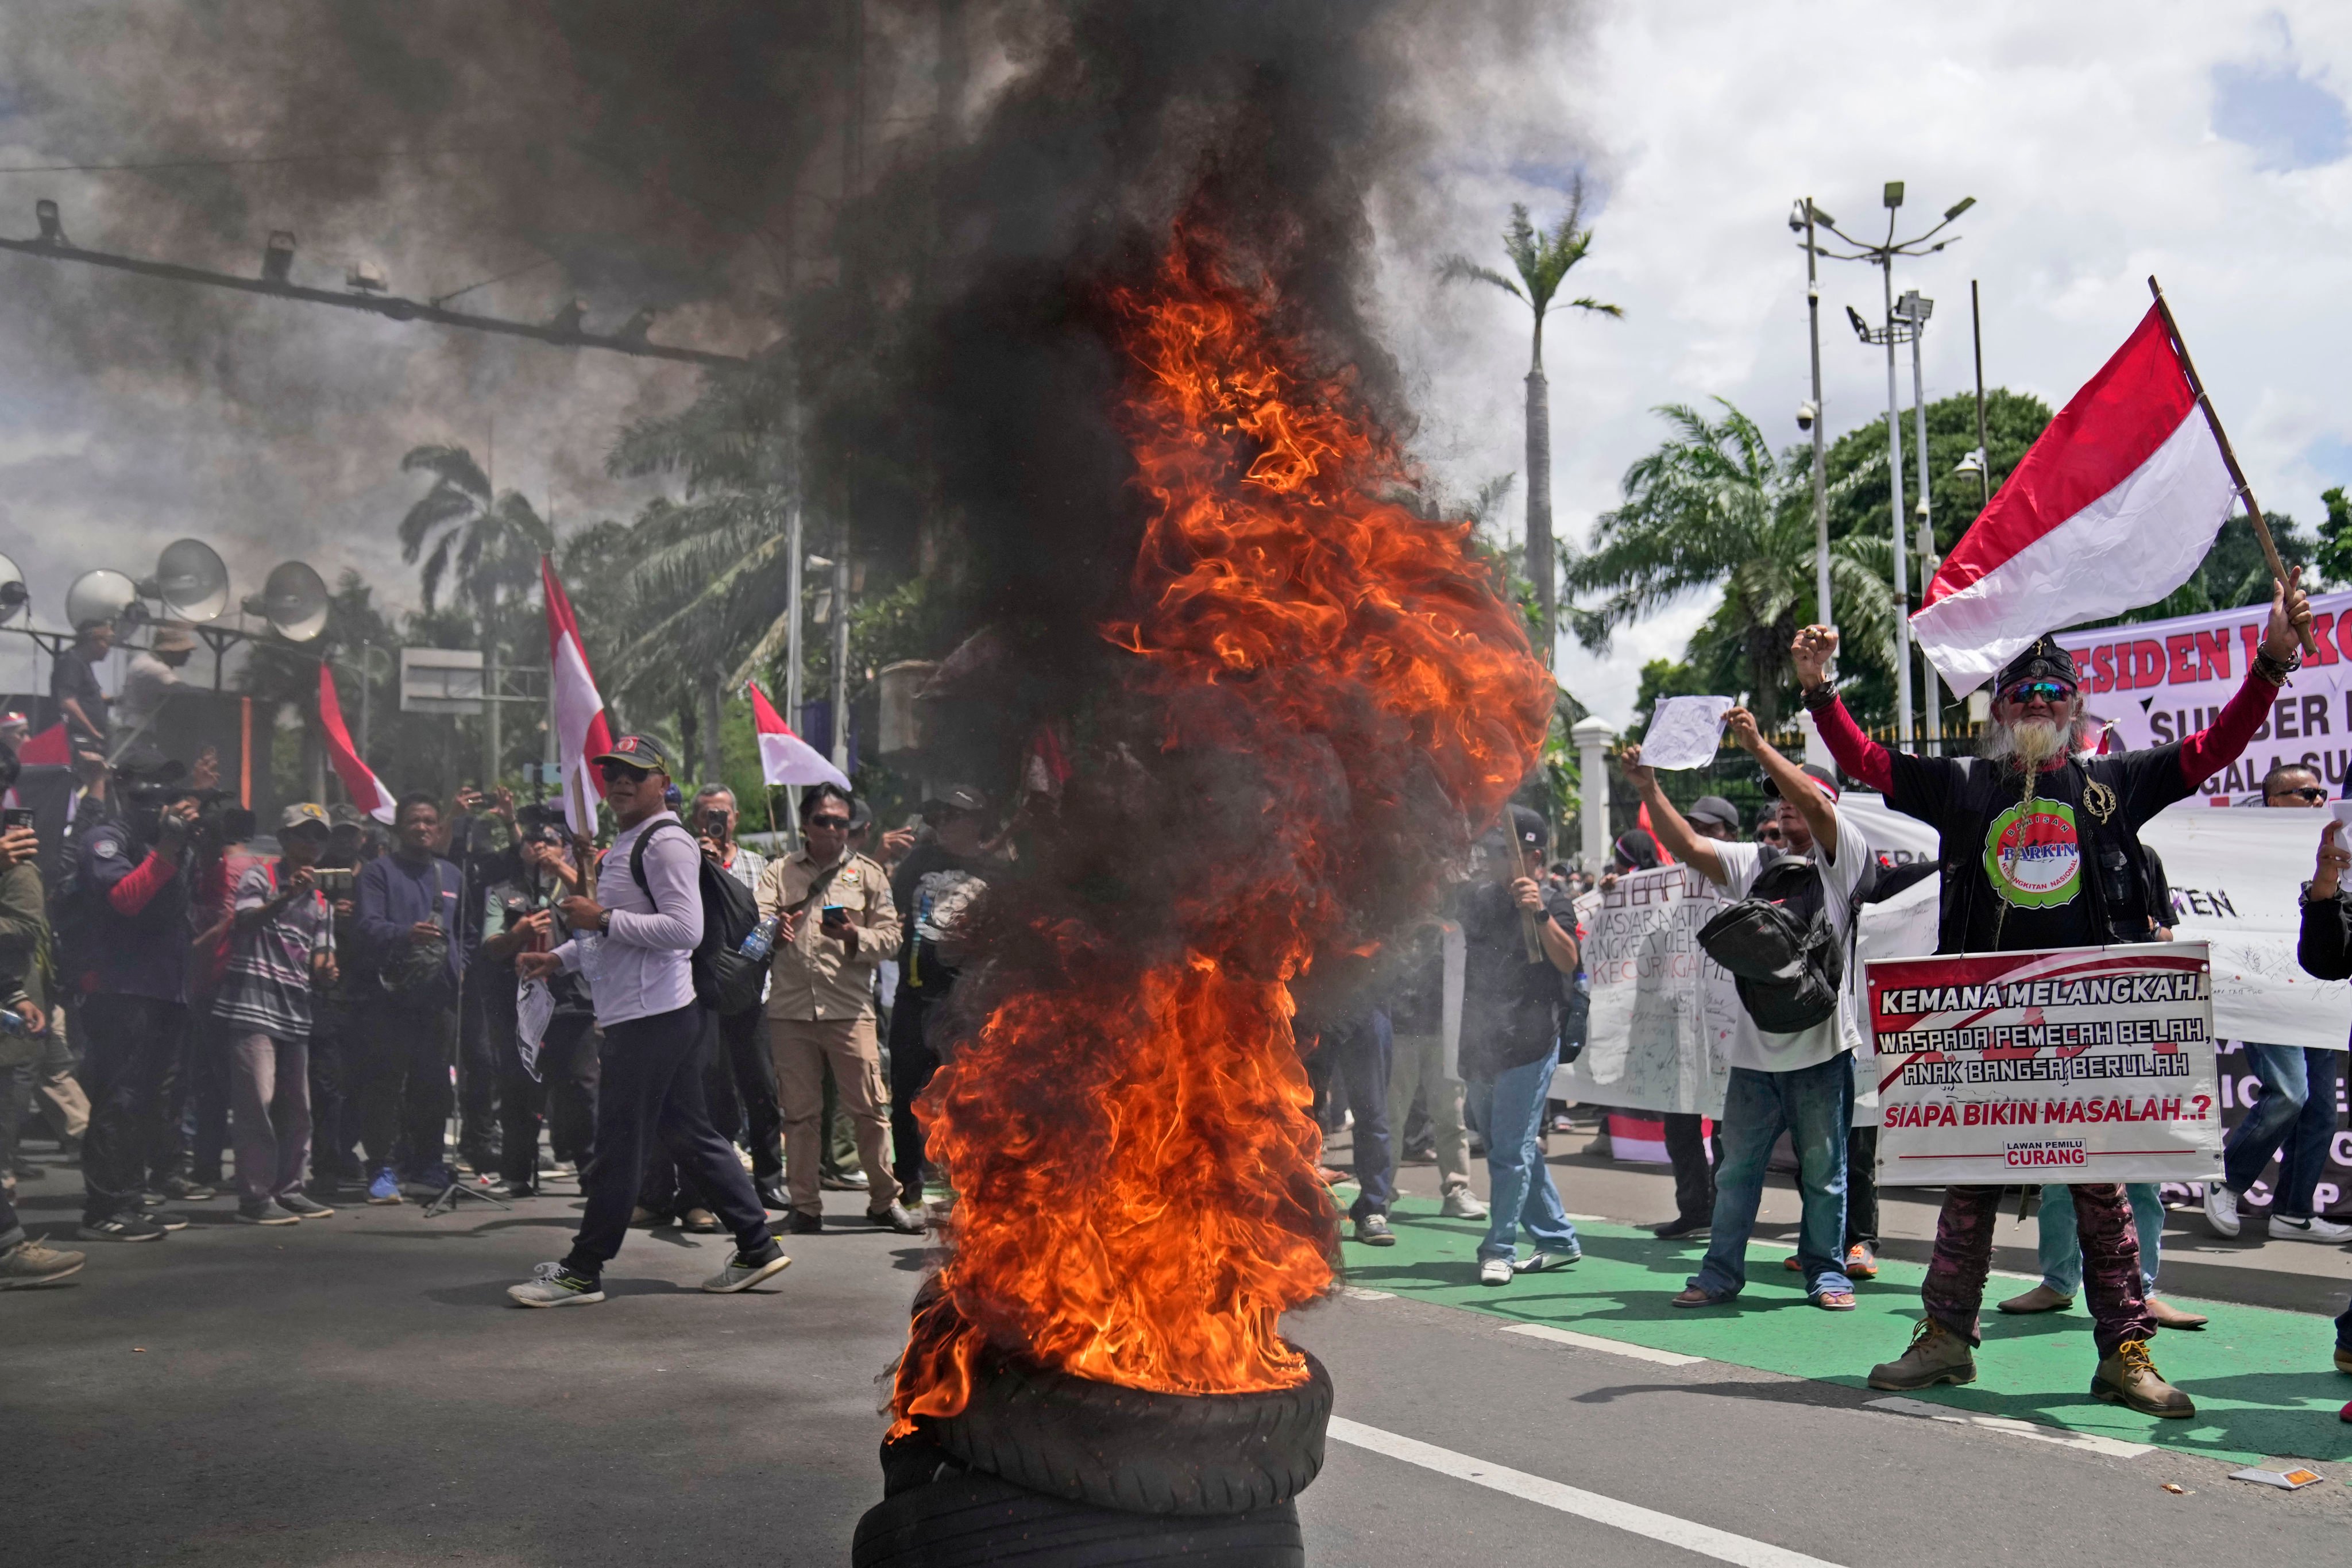 Protesters burn tyres during a rally on March 5 in Jakarta demanding the impeachment of Indonesian President Joko Widodo over allegations of election meddling. Photo: AP